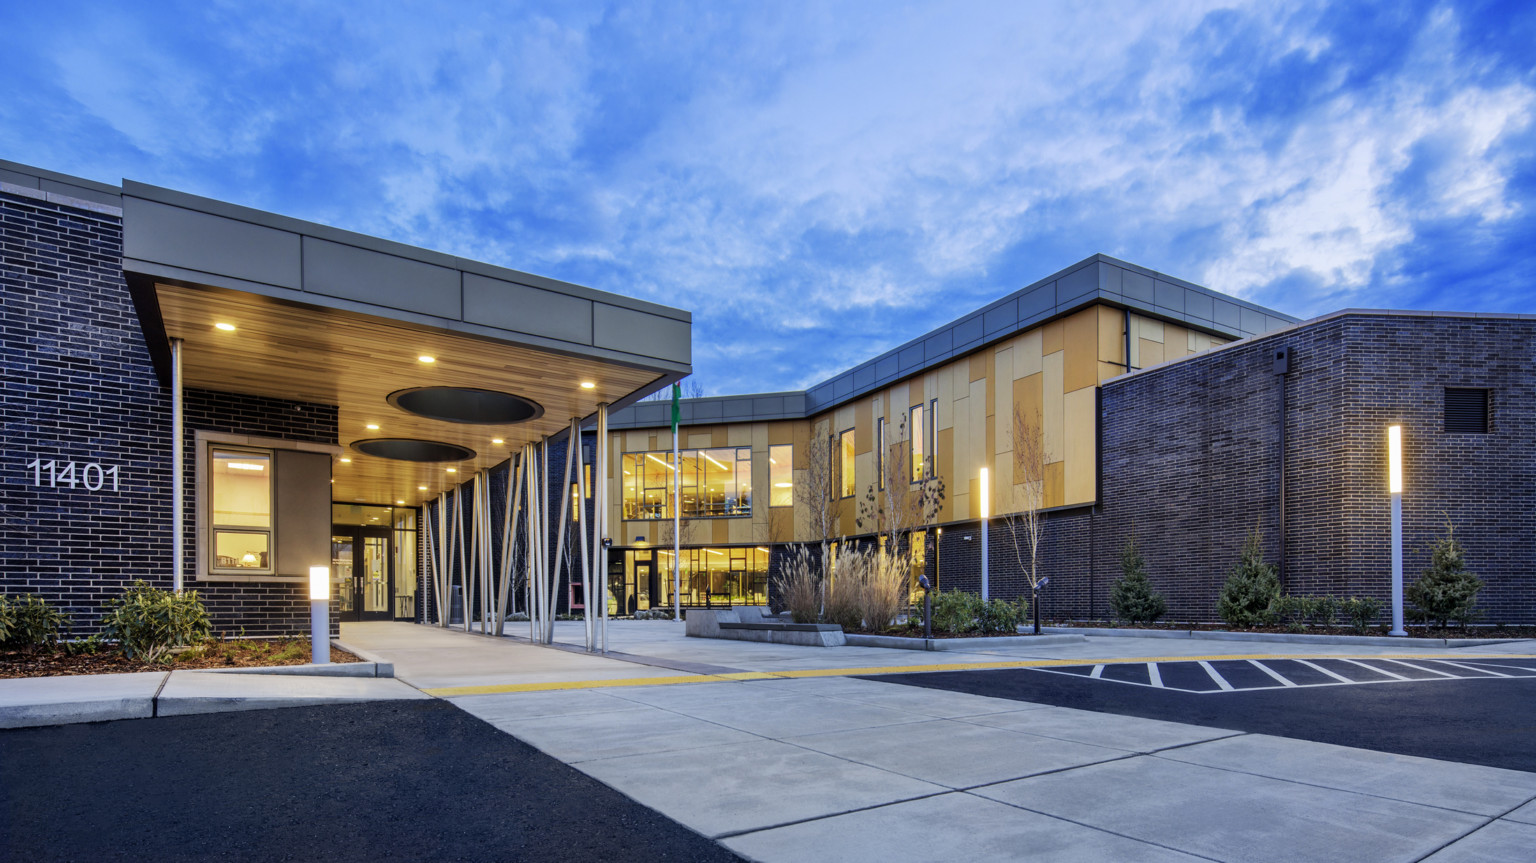 front entry sequence of Pathfinder Kindergarten Center illuminated at night